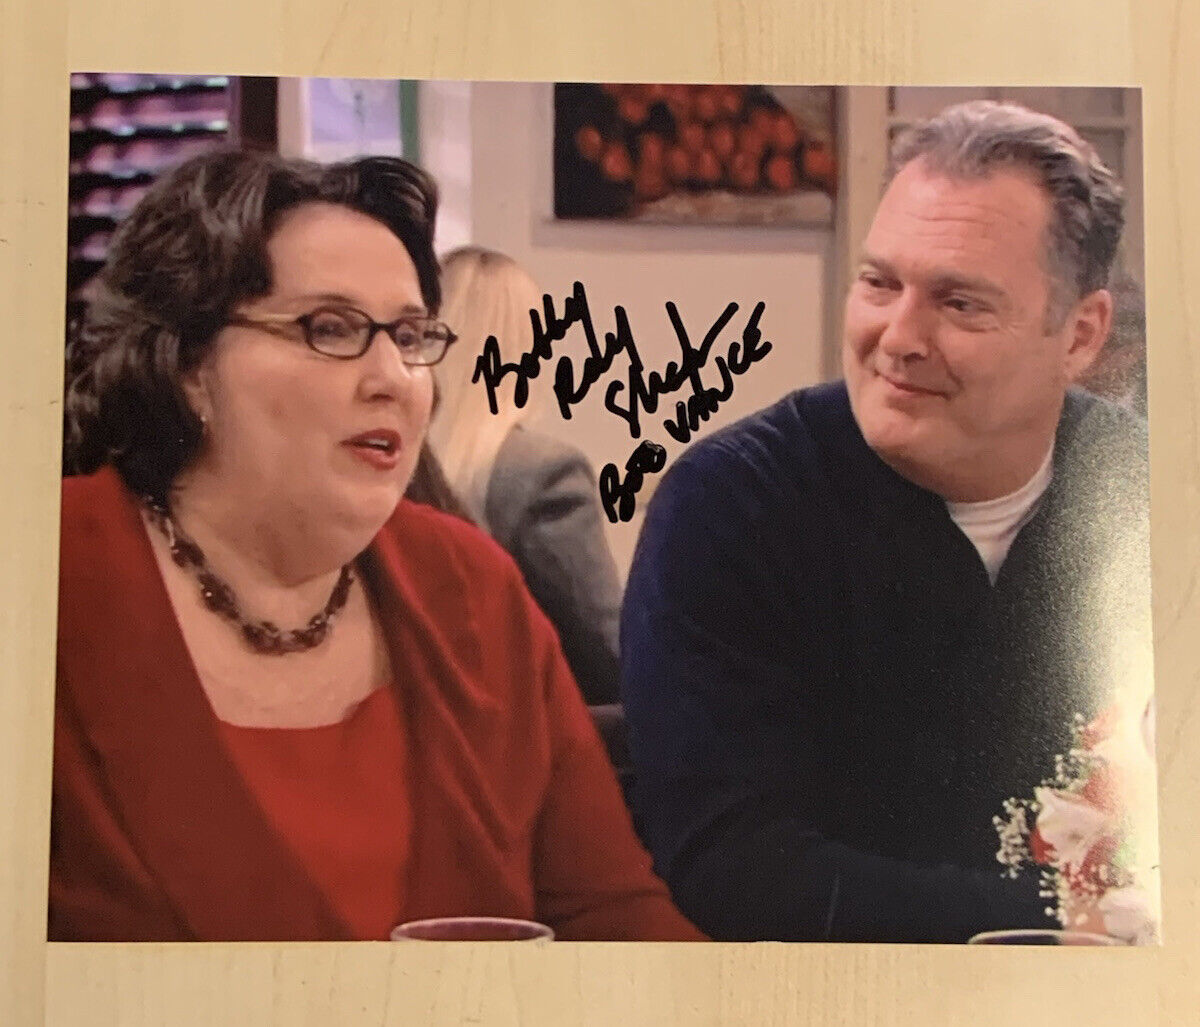 BOBBY RAY SHAFER SIGNED 8x10 Photo Poster painting ACTOR AUTOGRAPHED THE OFFICE SHOW RARE COA